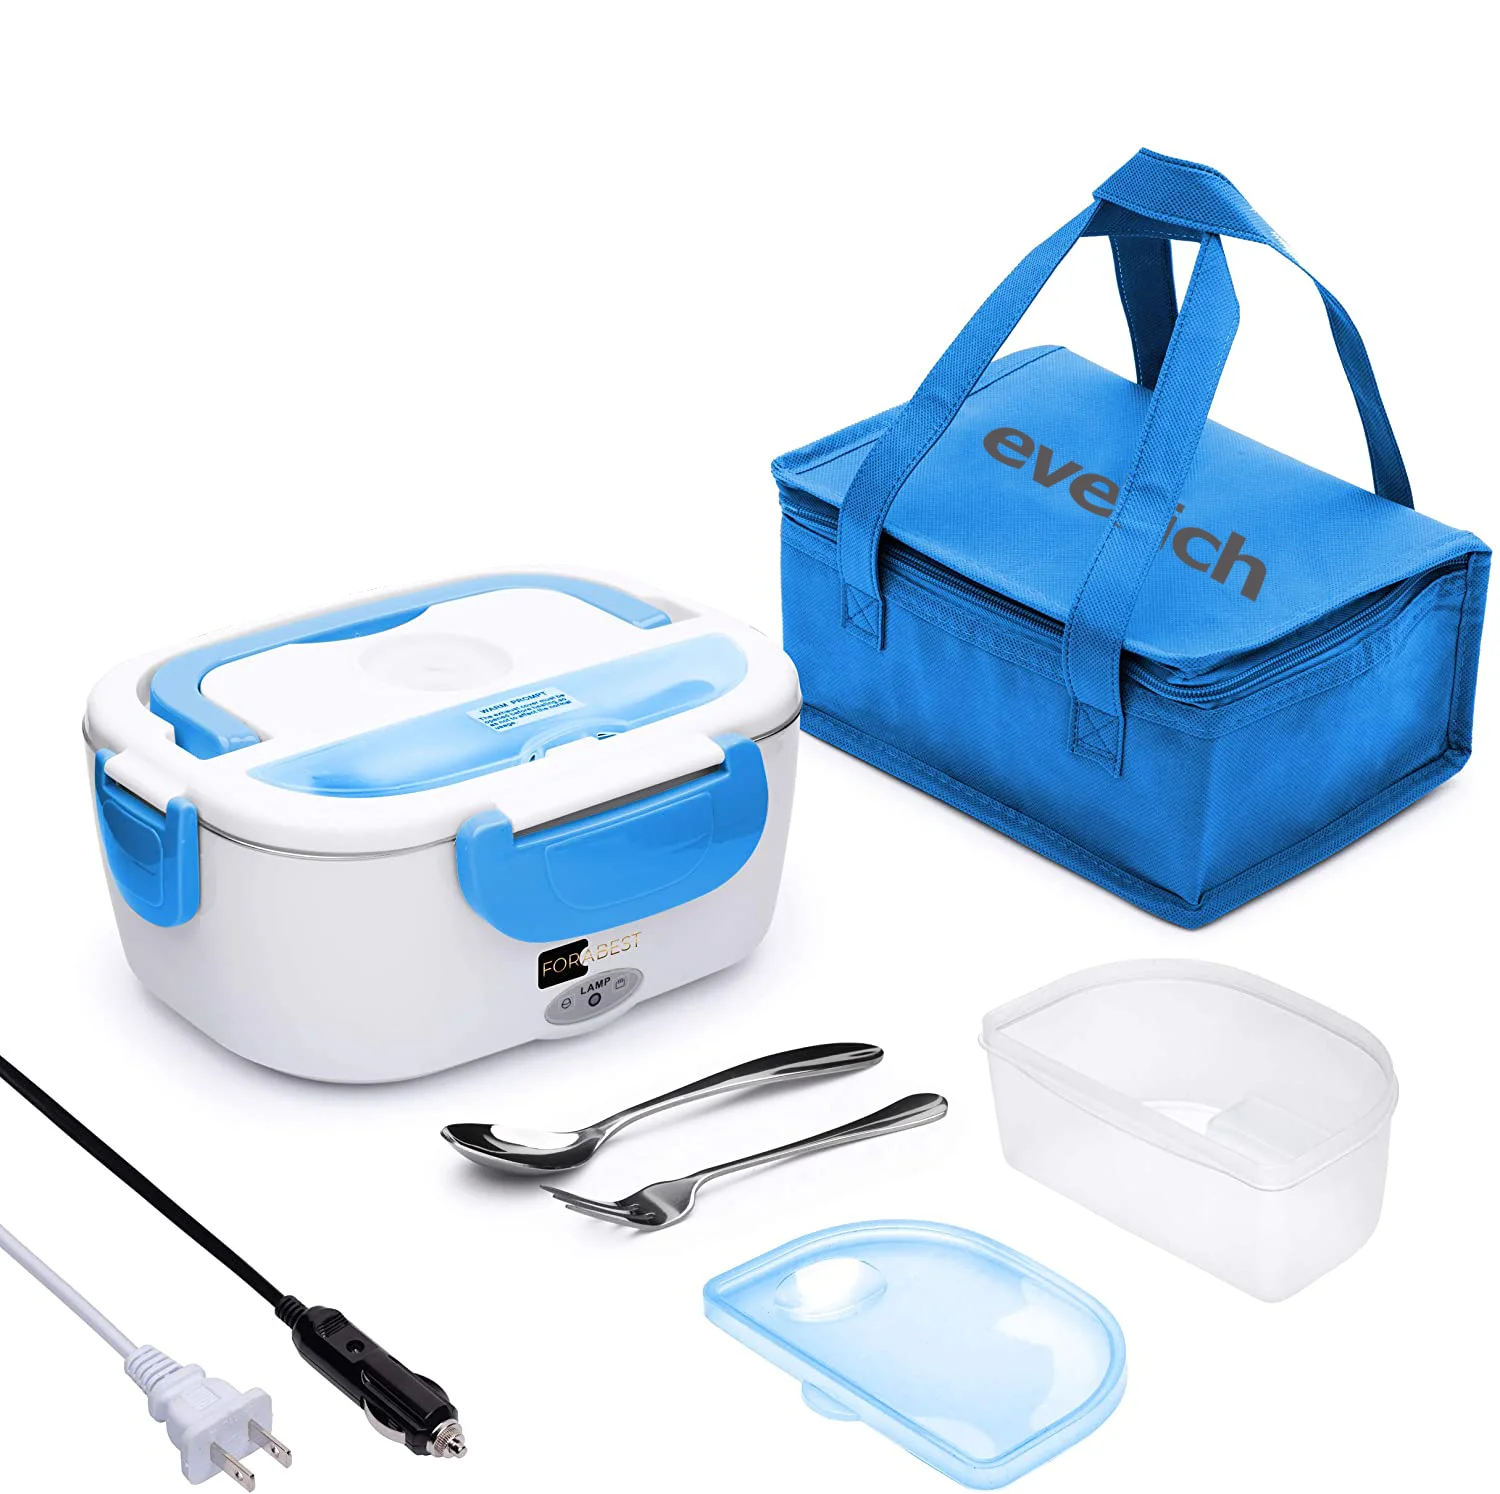 Portable 1.5L Car Hot Lunchbox Electric Blue Lunch Box Container Food Heater 